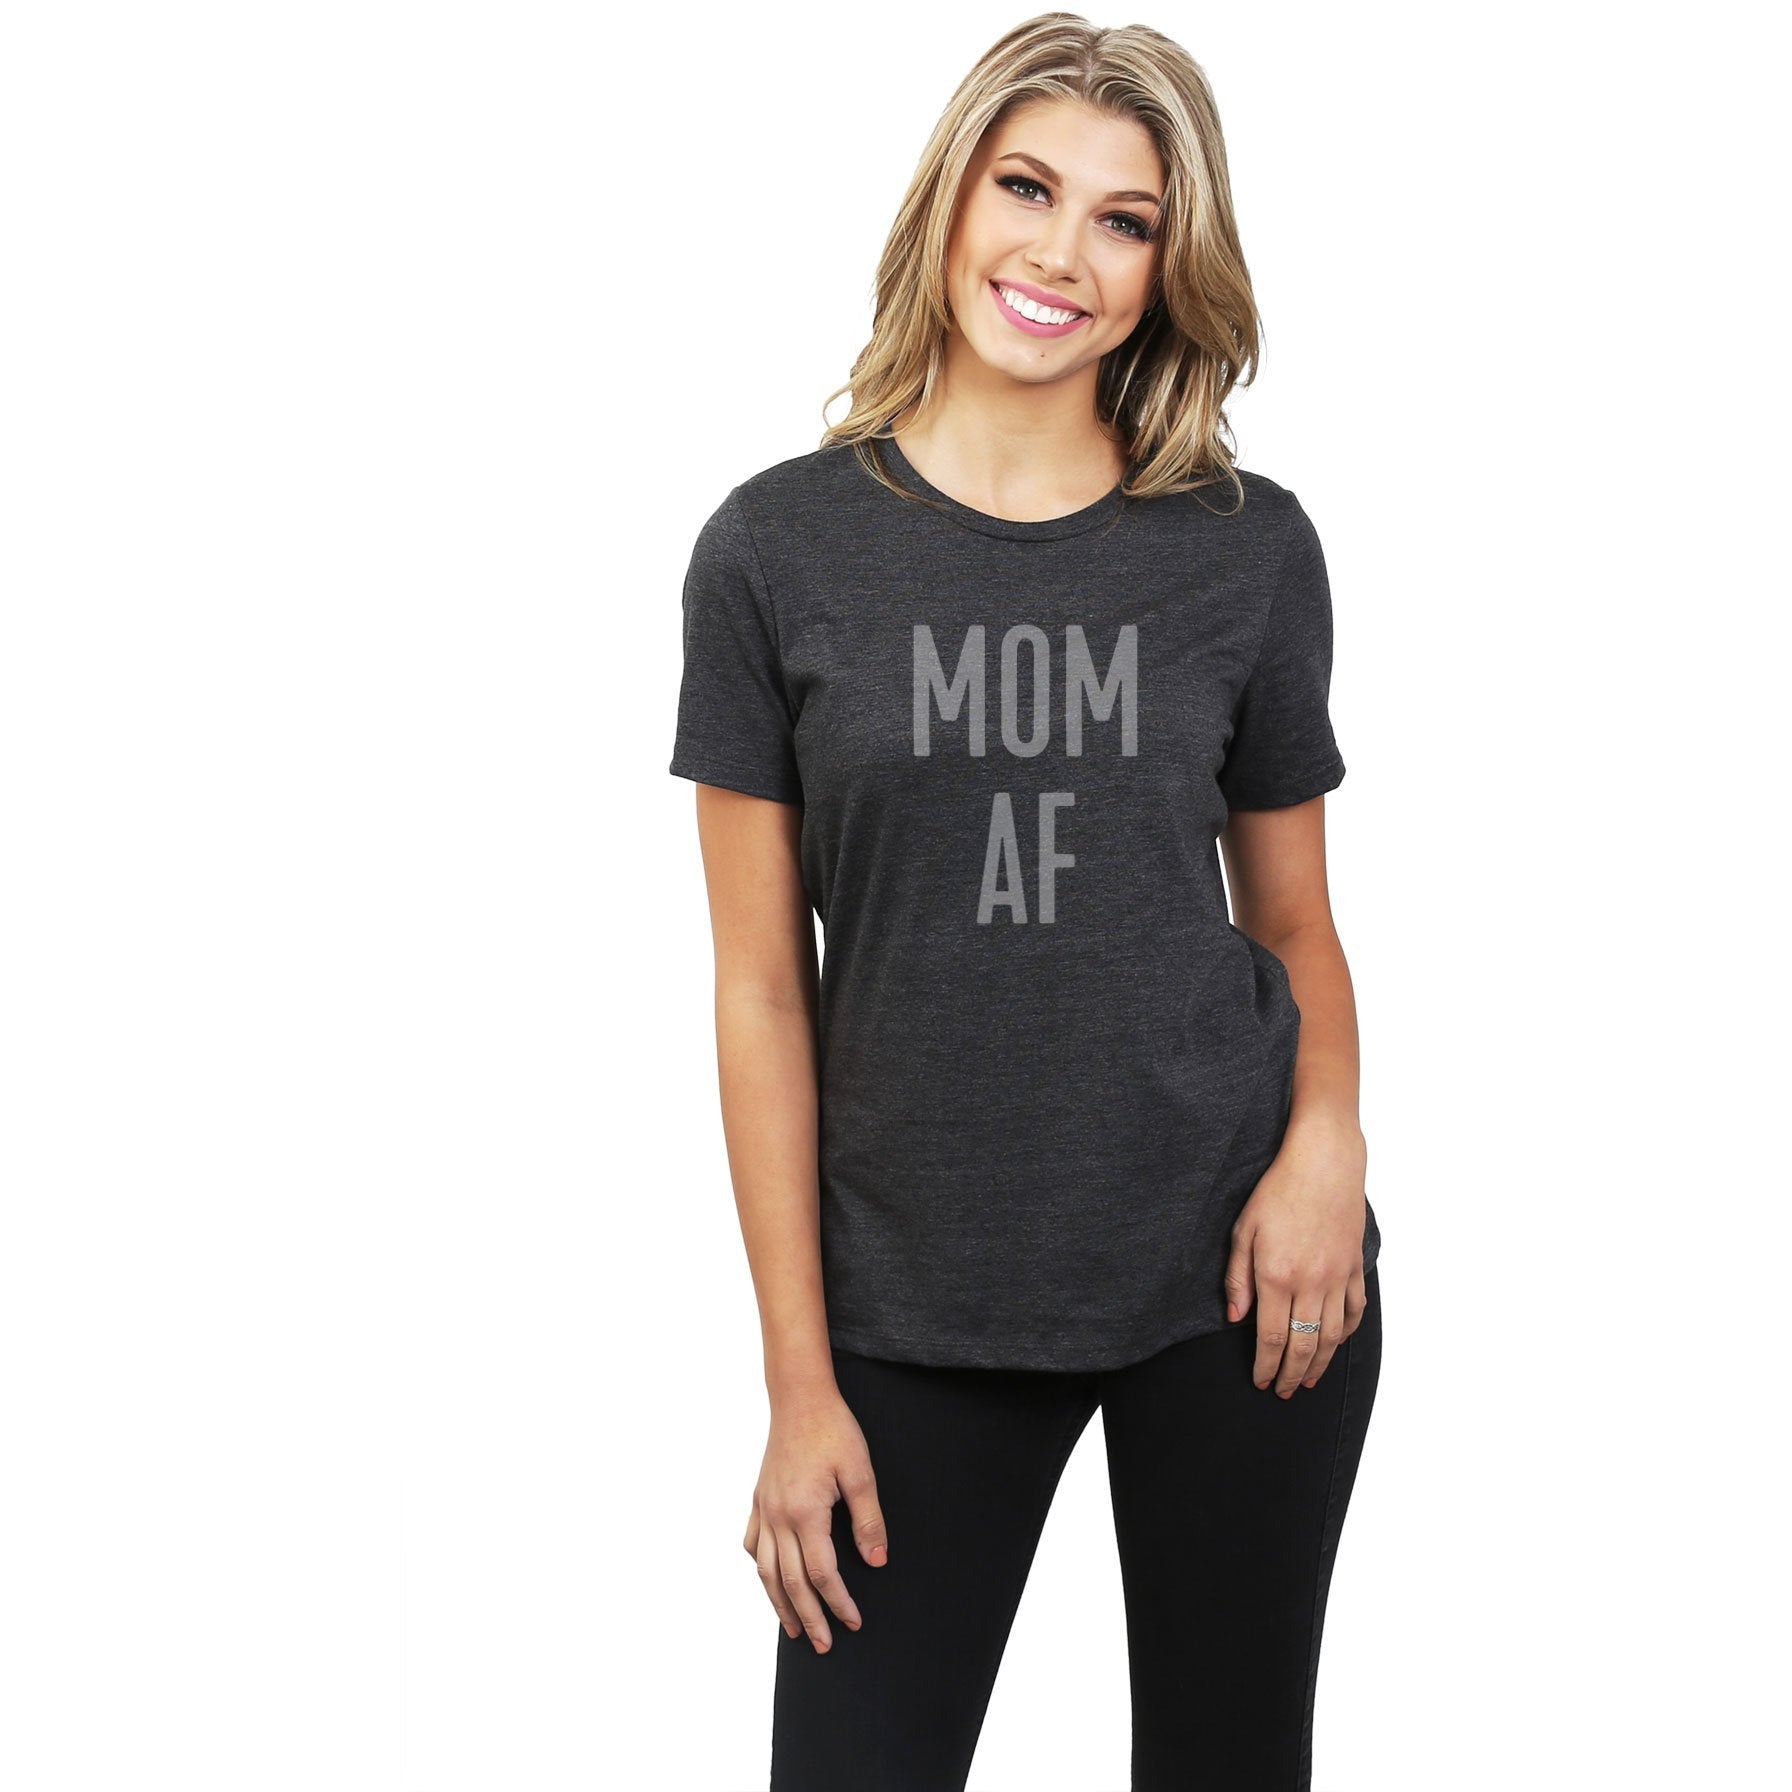 Mom AF Women's Relaxed Crewneck T-Shirt Top Tee Charcoal Grey Model